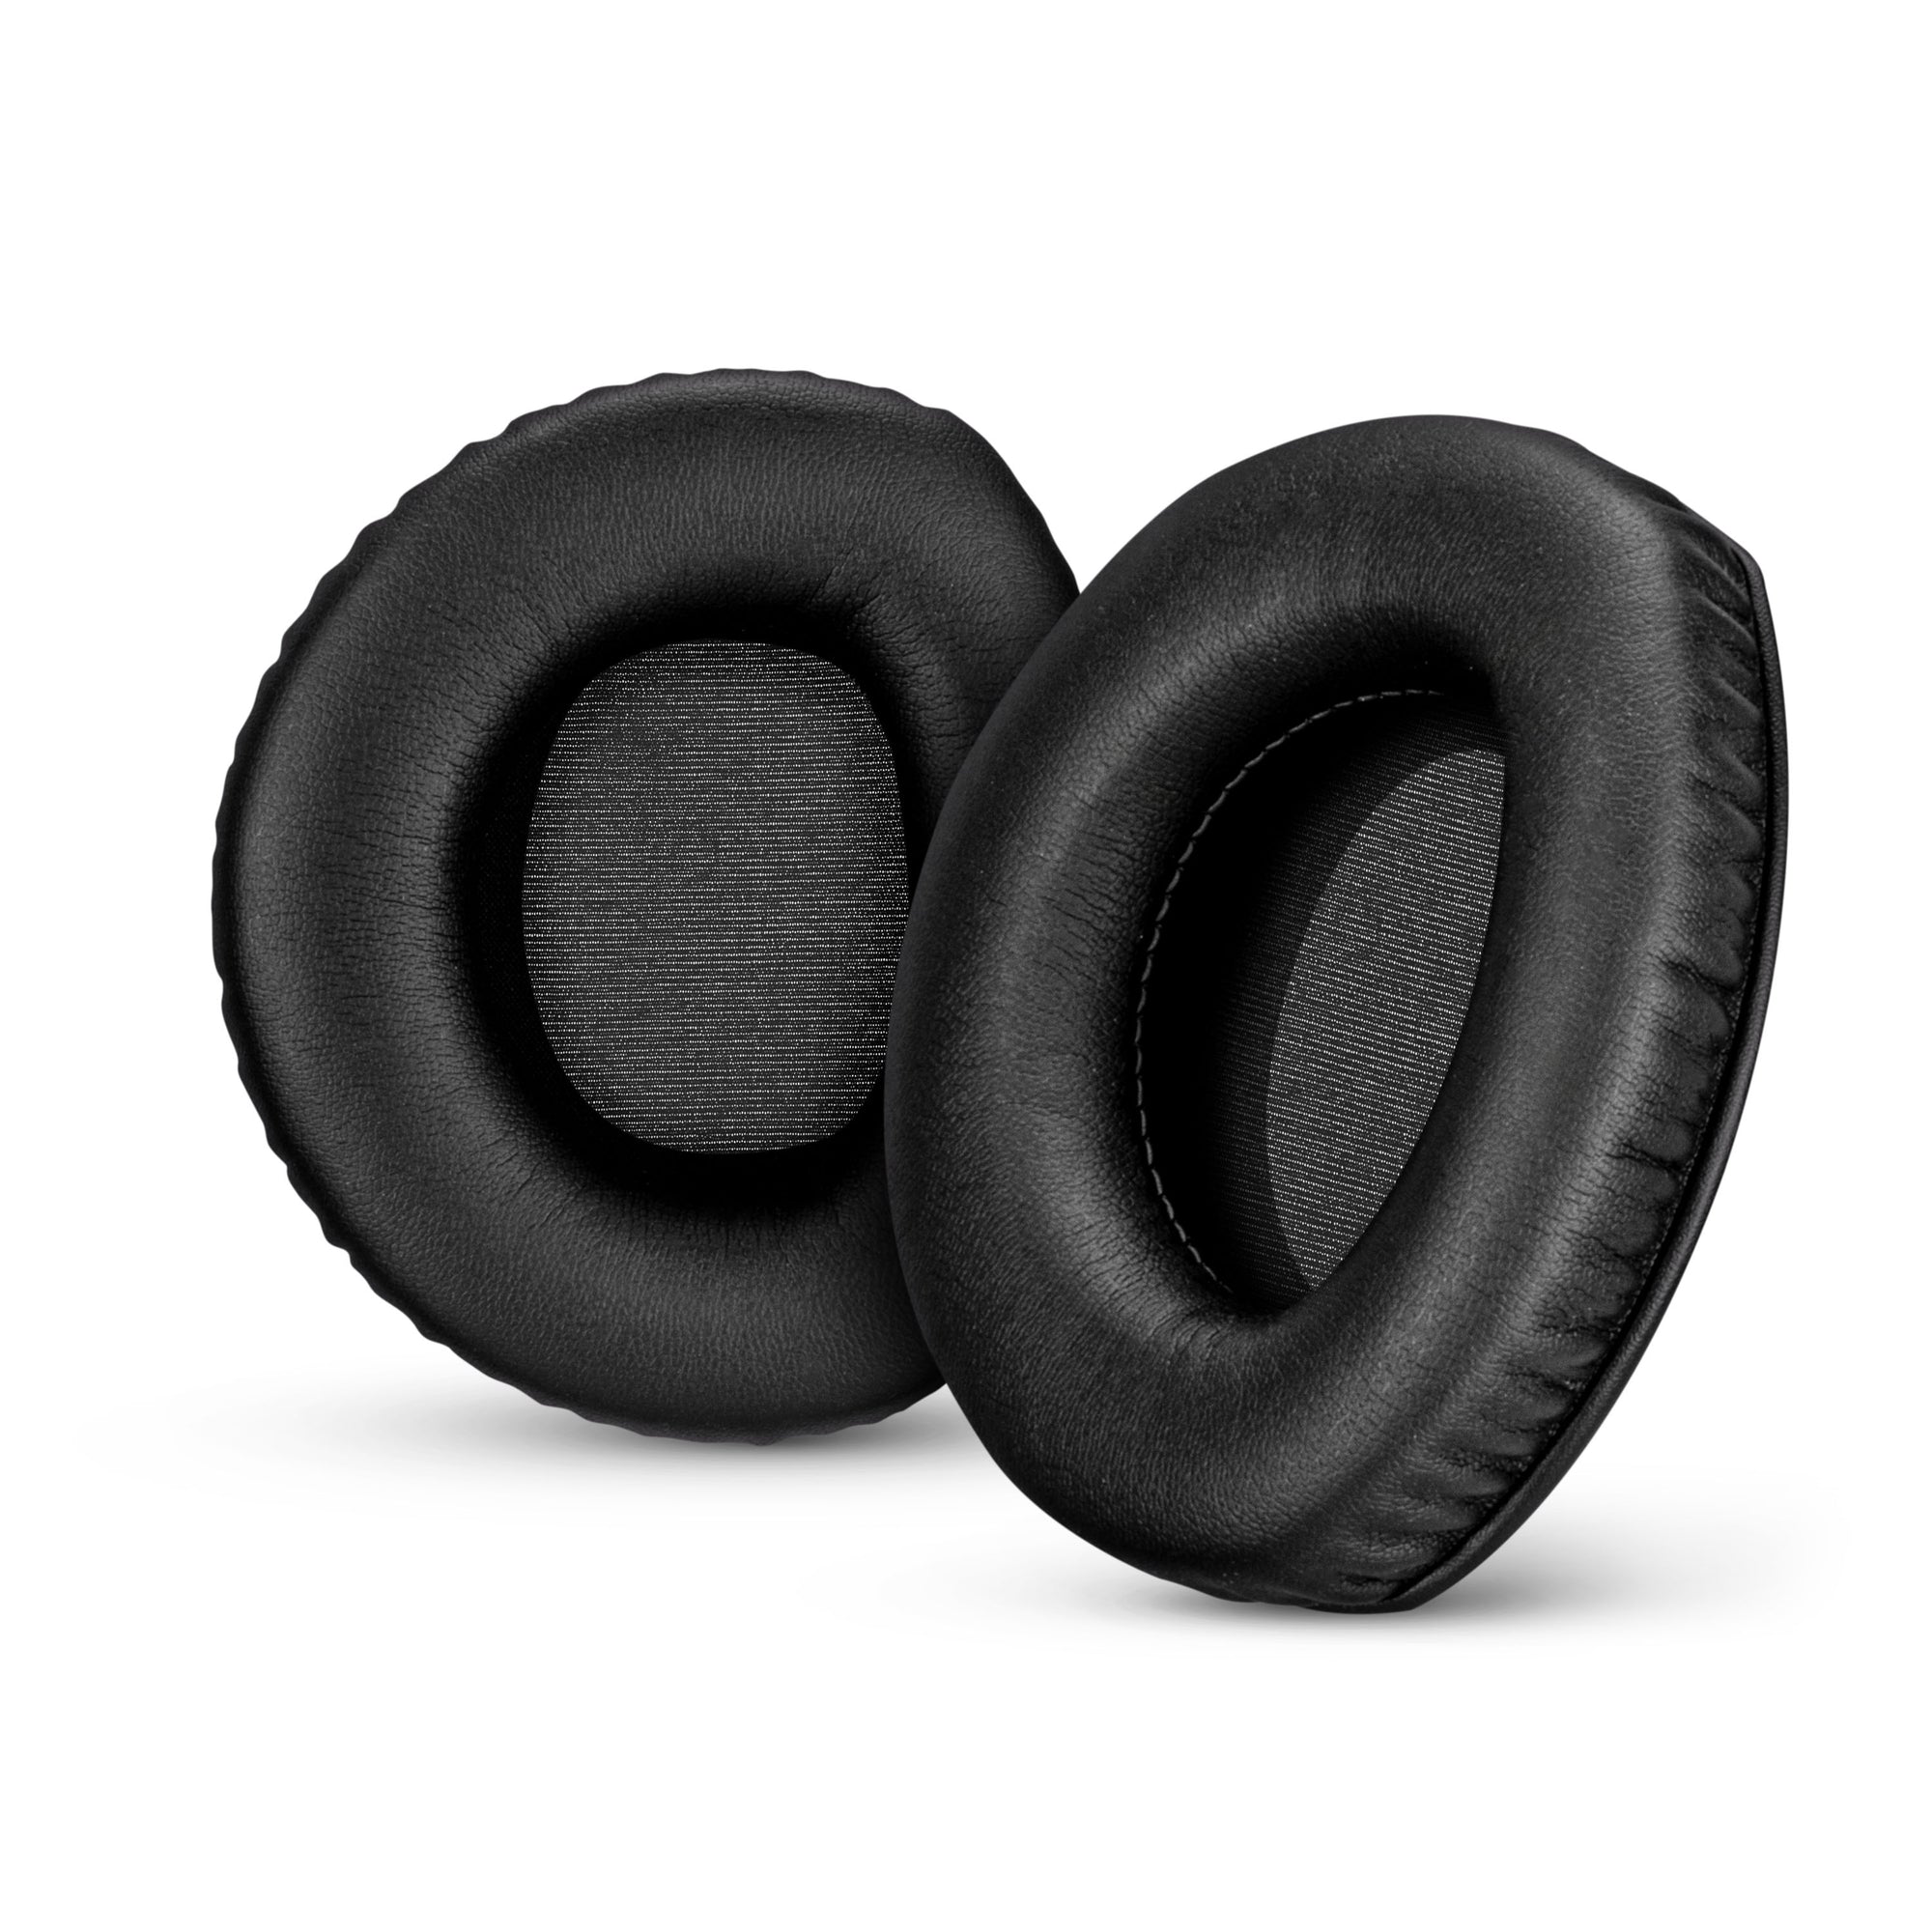 Replacement Earpads for Sennheiser RS160, RS170, RS180, HDR160, HDR170 & HDR180 Headphones